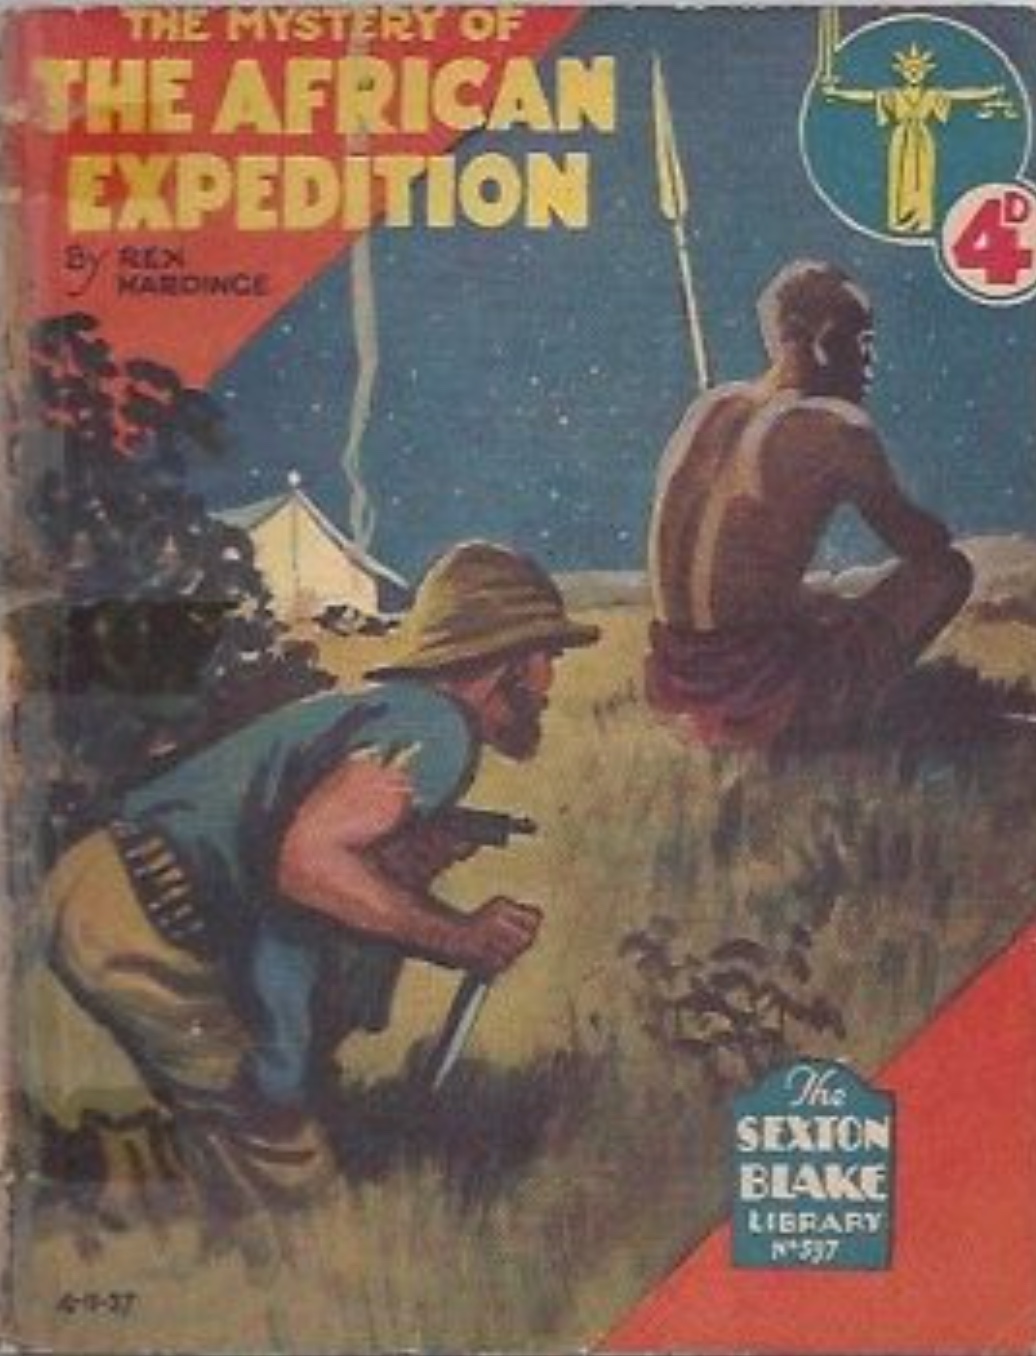 THE MYSTERY OF THE AFRICAN EXPEDITION